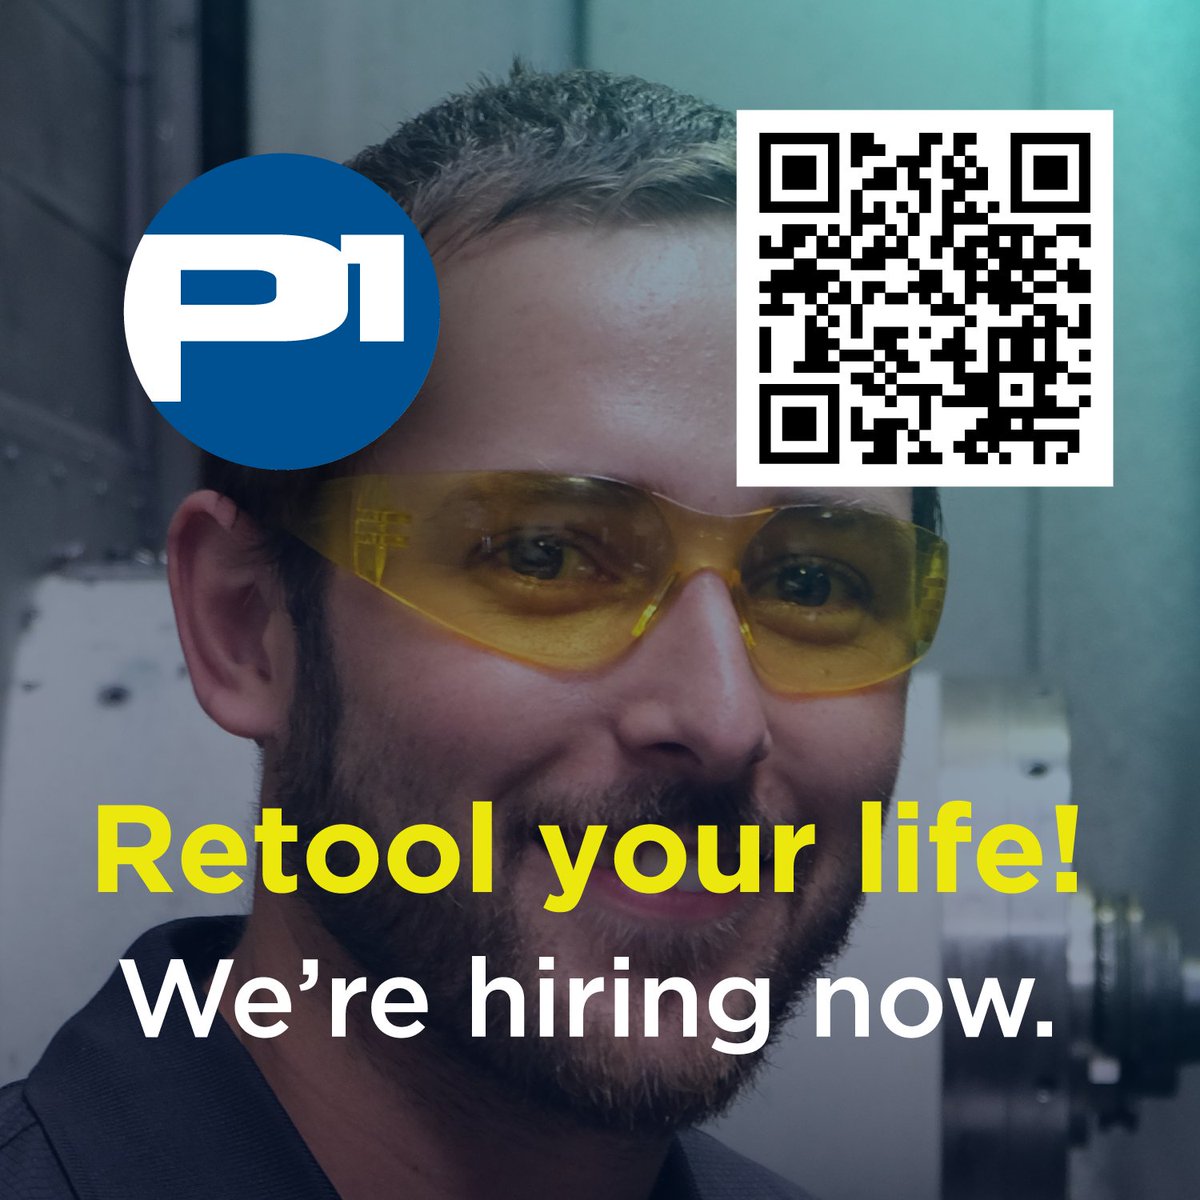 We're hiring machinists! Scan the code or click the link  and we'll get back to you right away: jobs.factoryfix.com/jobs?keyword=+…

#manufacturing #machinist #jobs #career